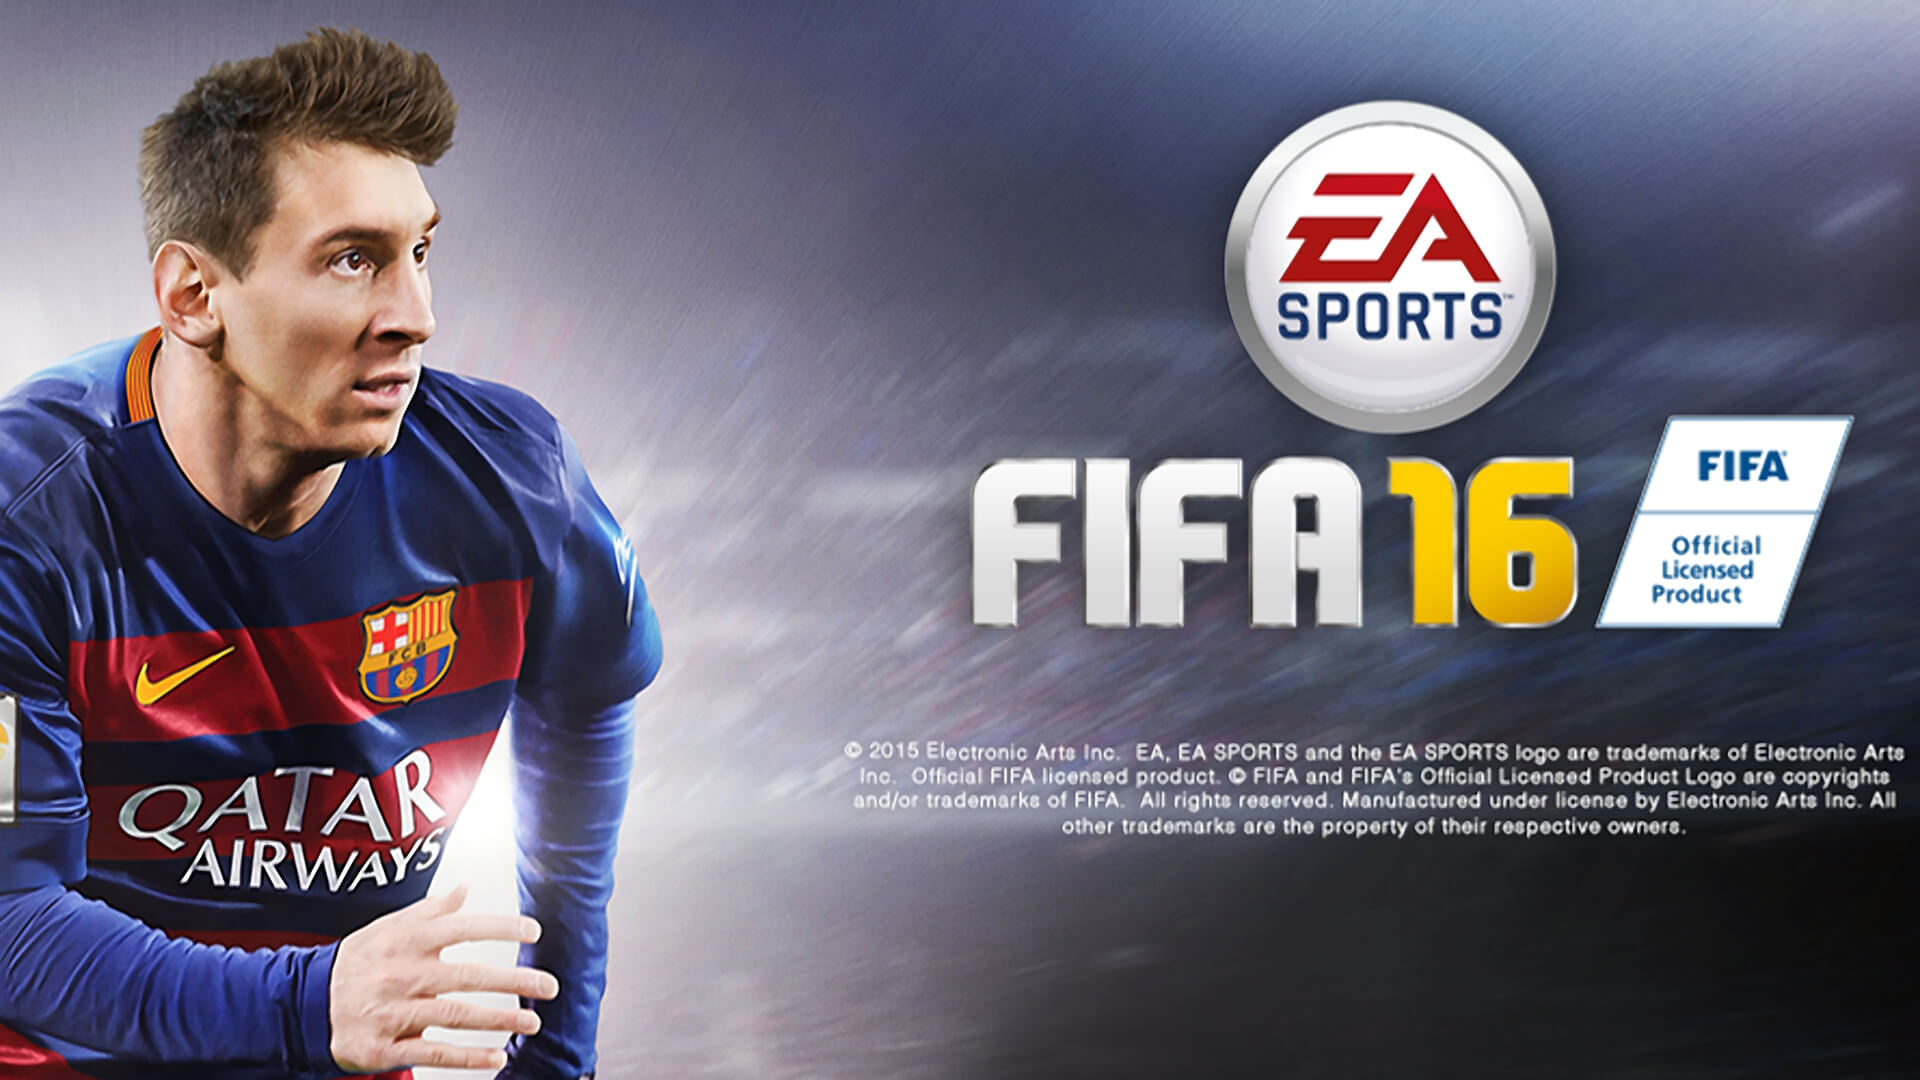 FIFA 16 Leo Messi 2016 Official Cover Poster Wallpaper